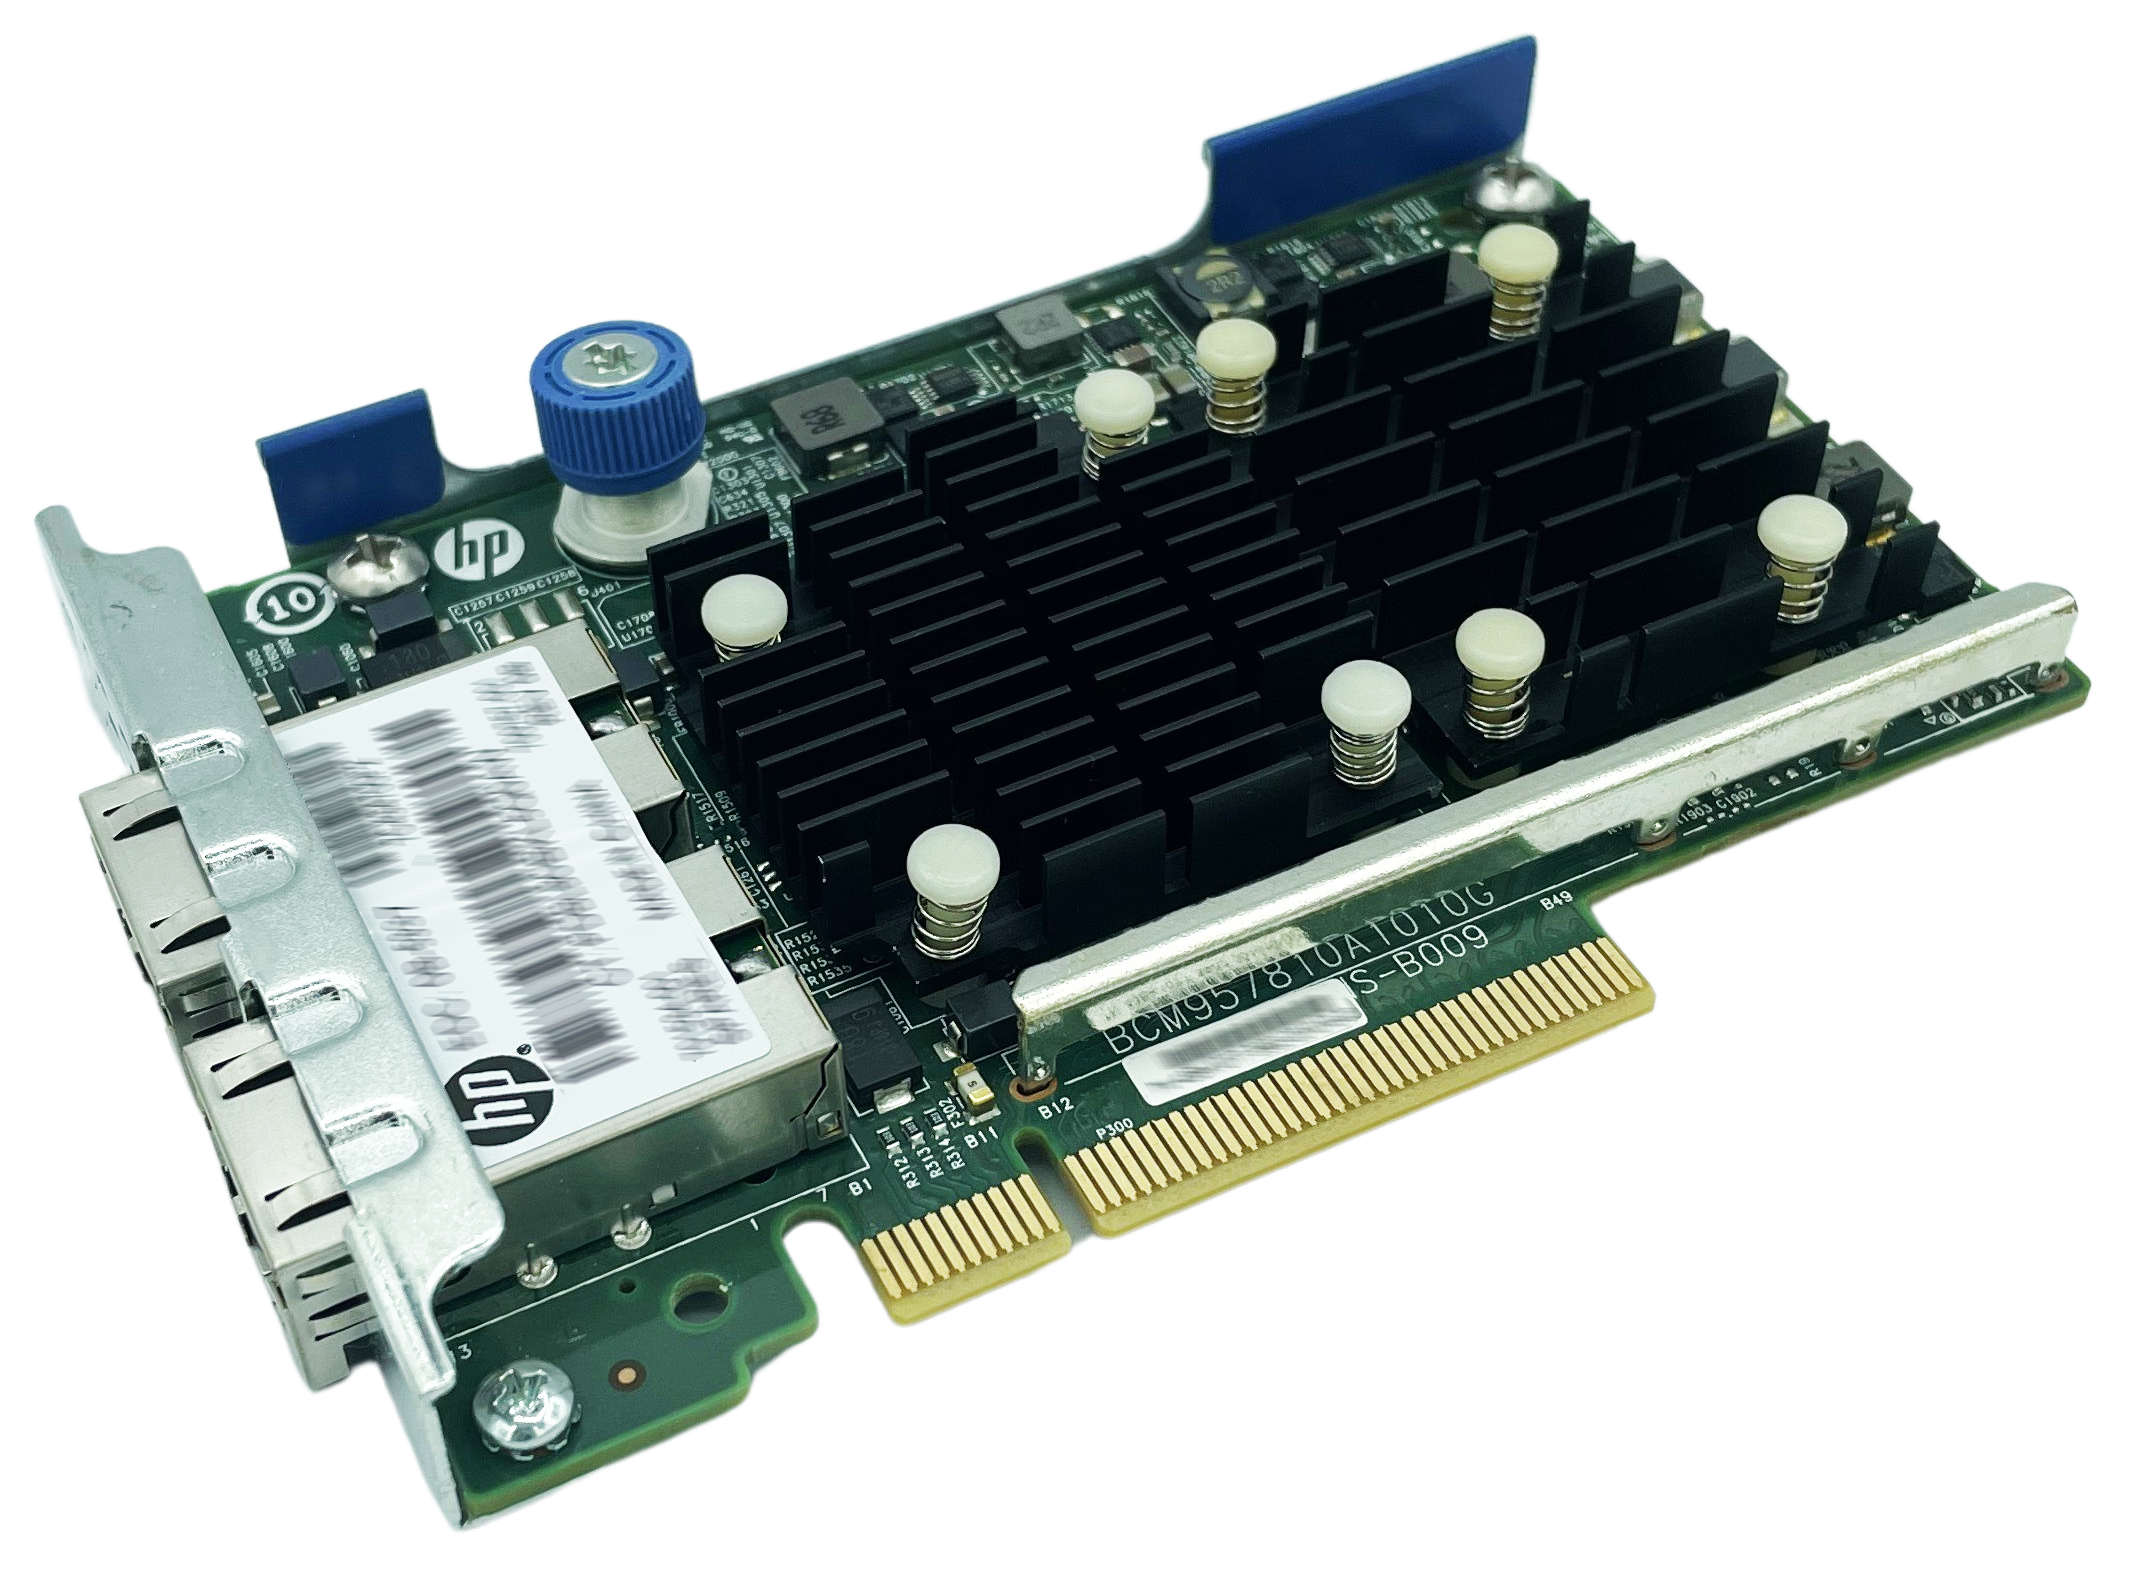 665249R-B21 HPE Ethernet 10Gb 2P 560SFP+ Remanufactured Adapter